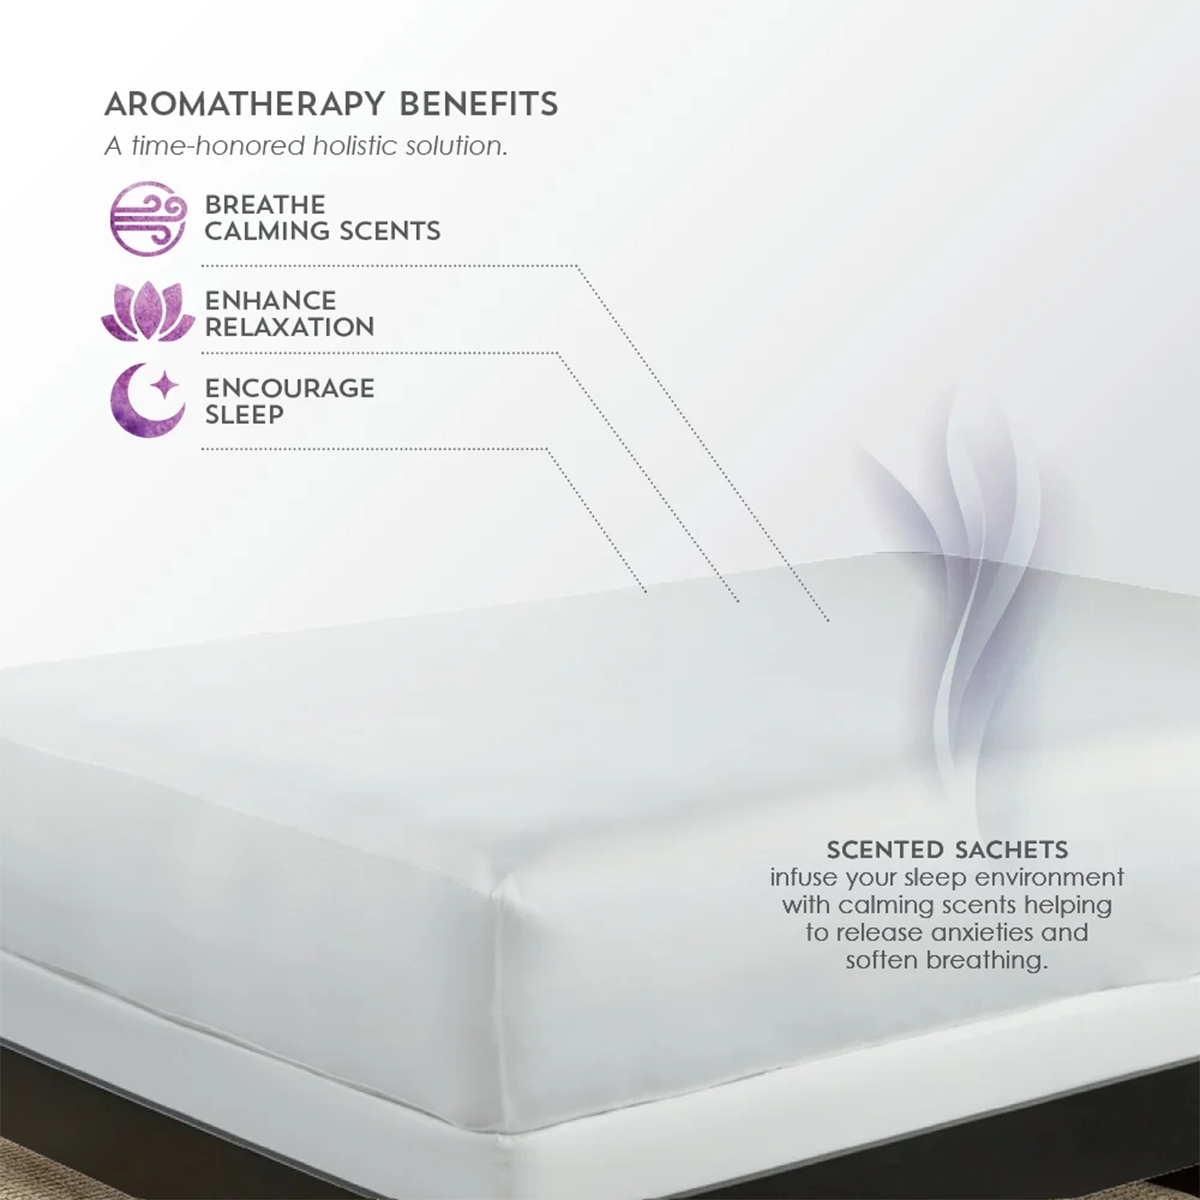 Aromatherapy Mattress Protector By Purecare Benefits